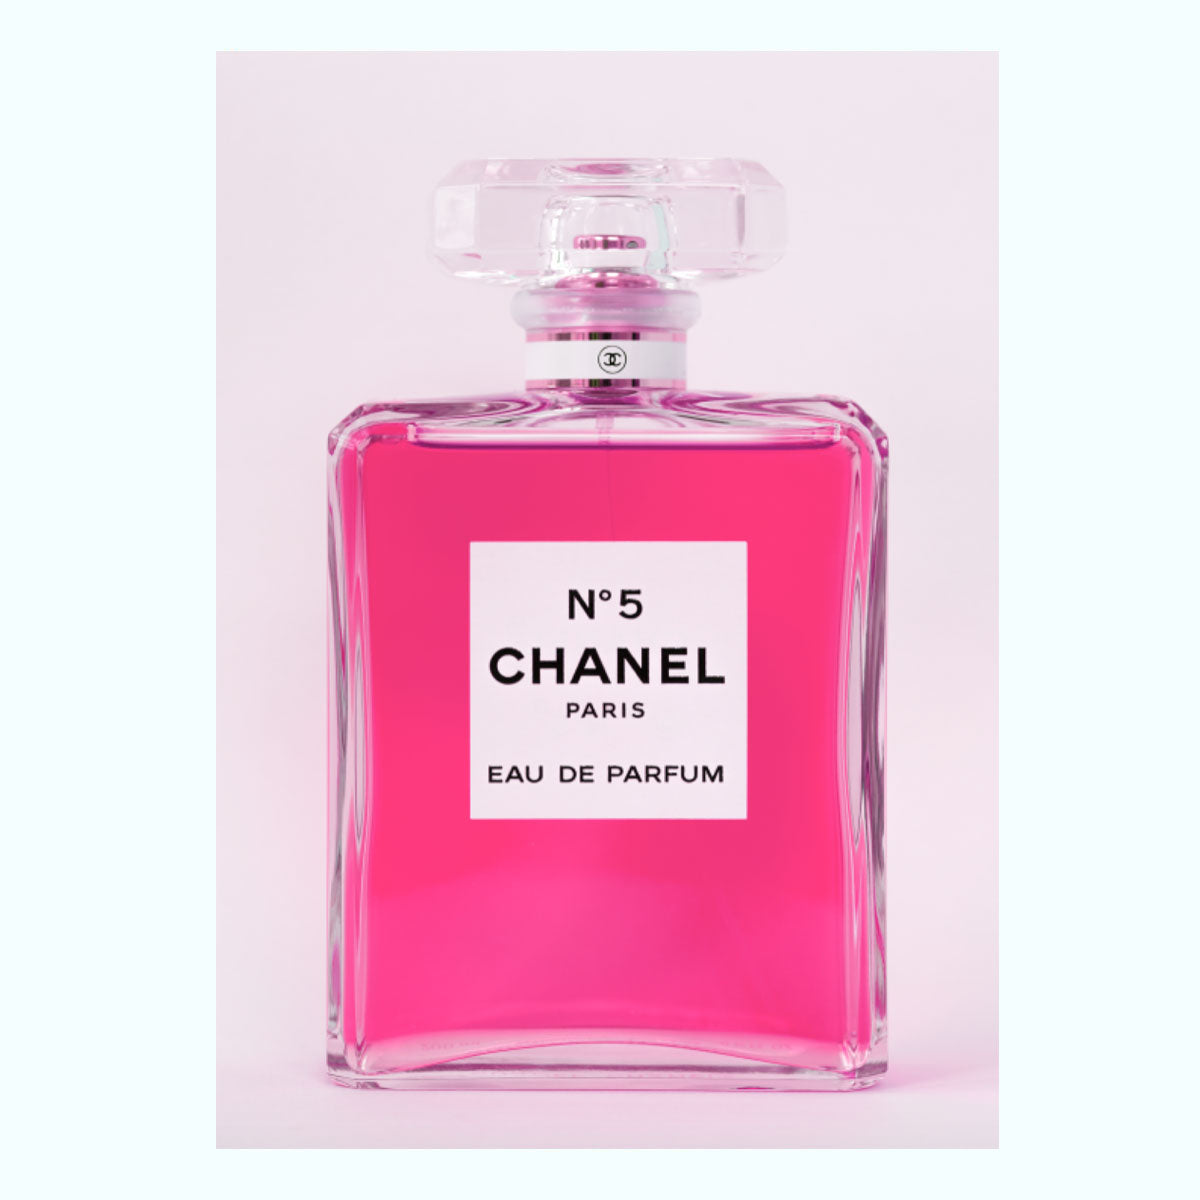 I Only Wear Chanel No.5 (Pink) Art Print